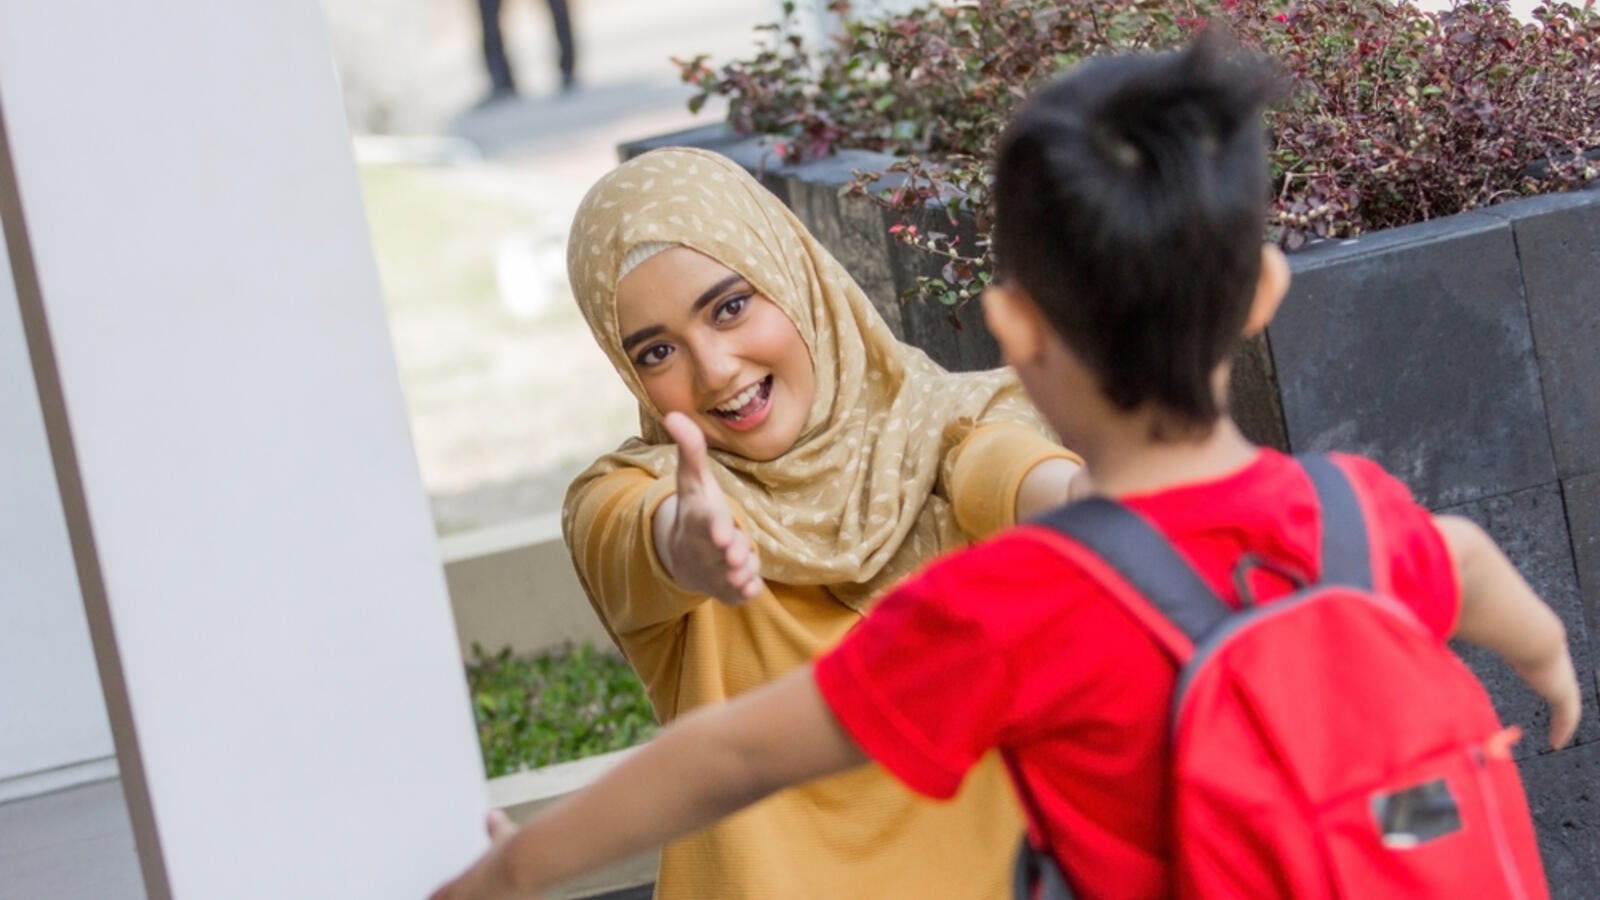 Photo of France might ban hijabi mothers from joining kids on school trips